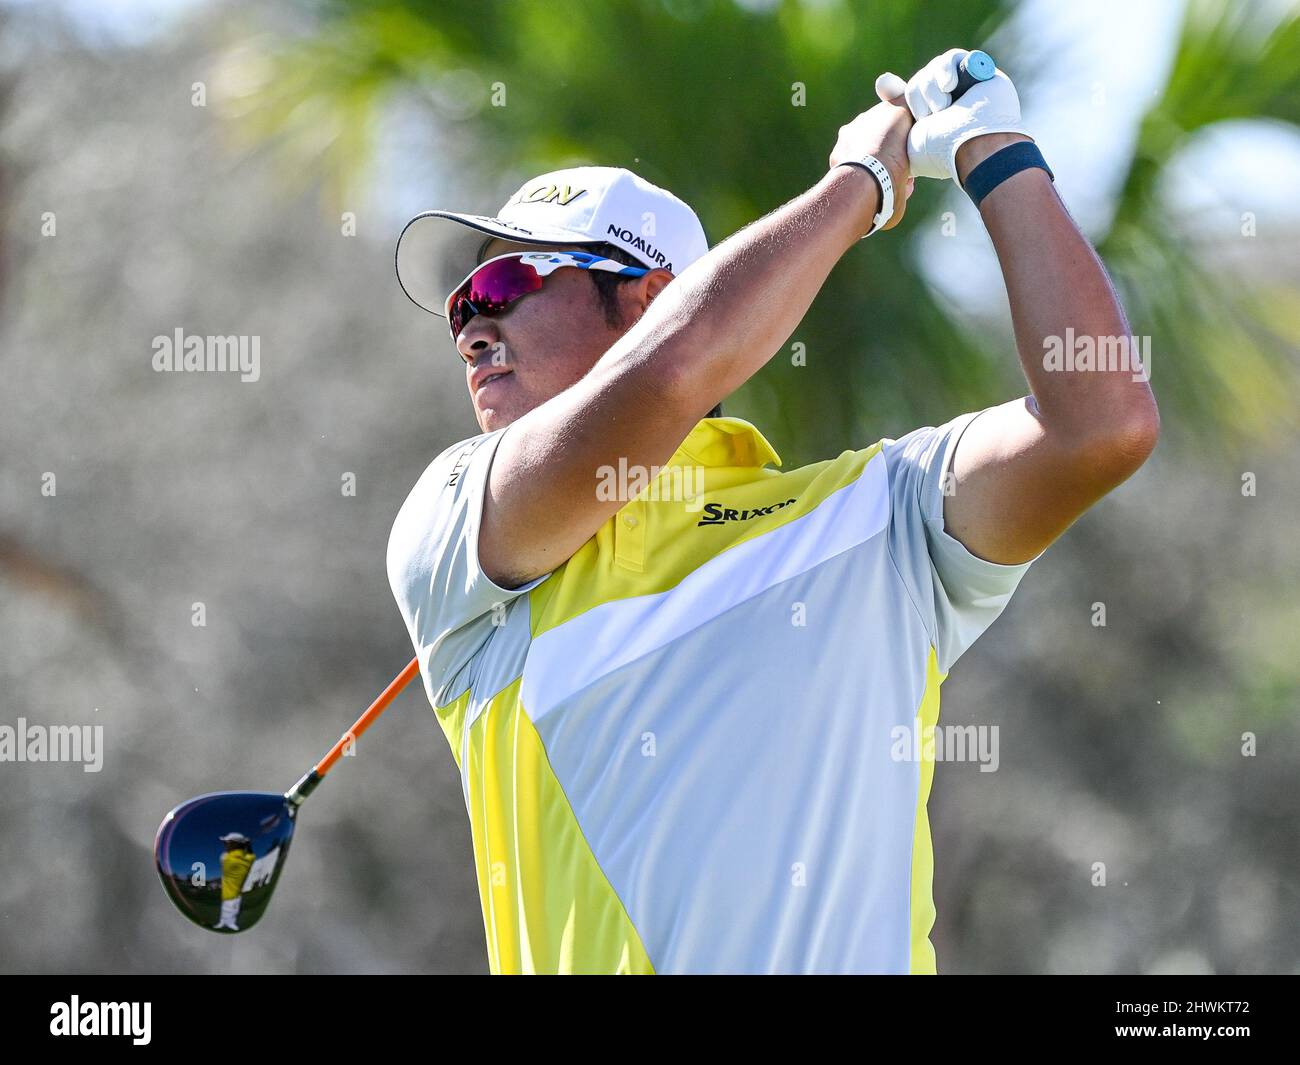 Orlando, FL, USA. 6th Mar, 2022. A reflect of Hideki Matsuyama of Japan on his drive head from 10th tee during final round of the Arnold Palmer Invitational presented by Mastercard held at Arnold Palmer's Bay Hill Club & Lodge in Orlando, Fl. Romeo T Guzman/CSM/Alamy Live News Stock Photo